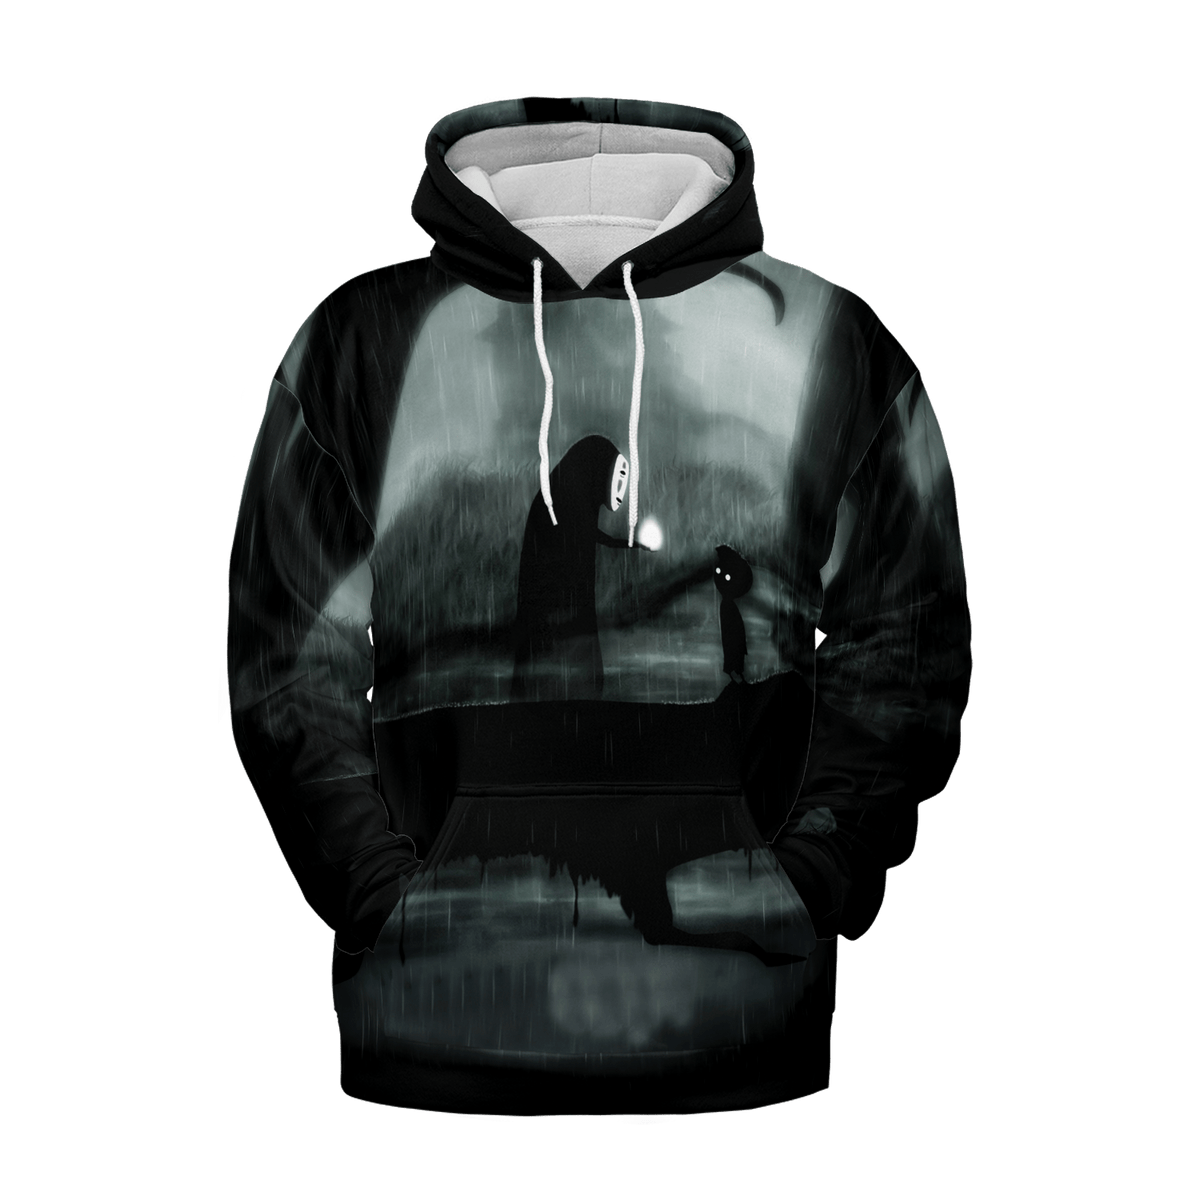 No Face and Limbo 3D Hoodie